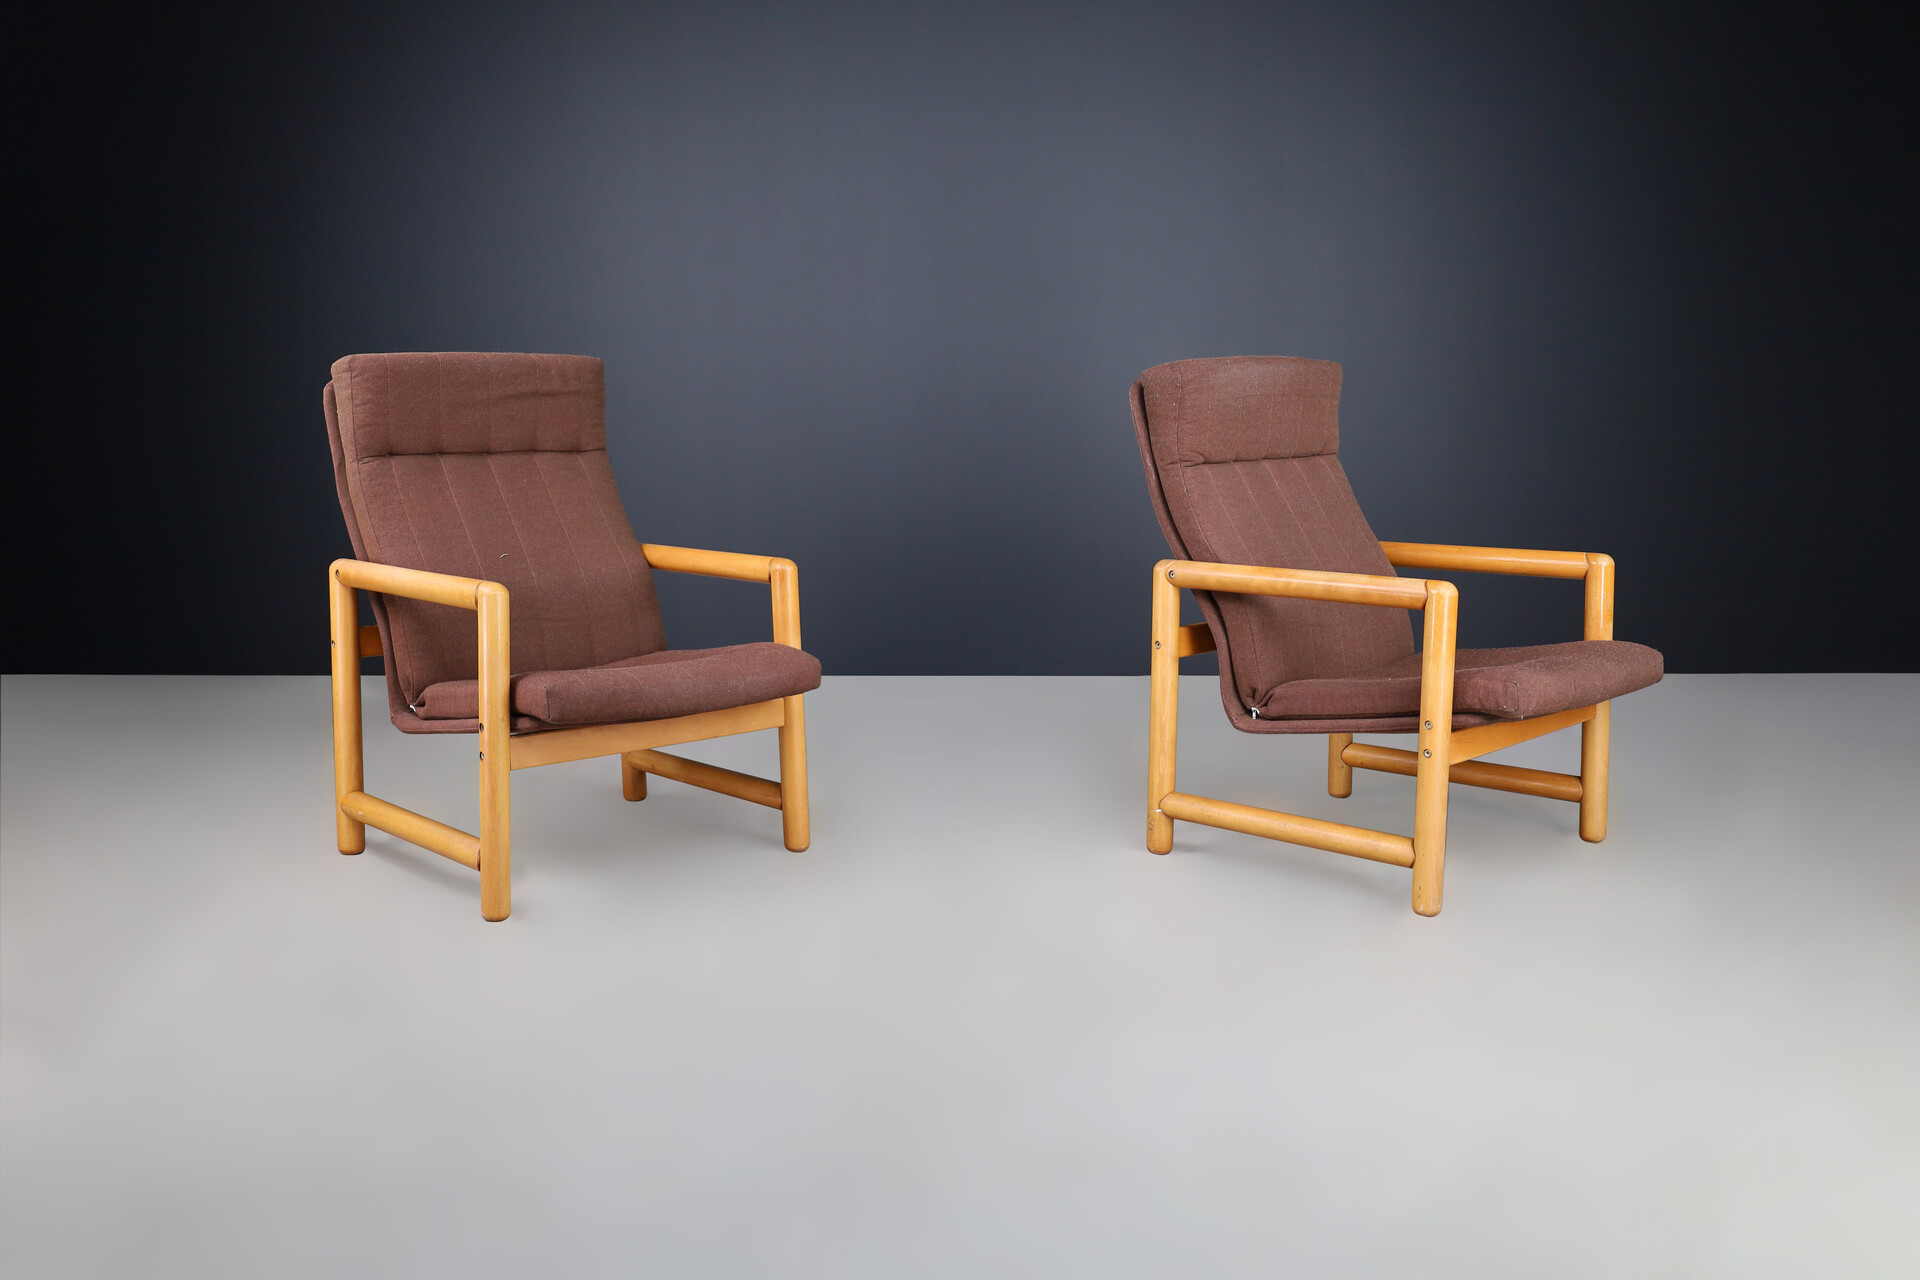 Mid century modern Armchairs / lounge chairs in original fabric and wood, Cz 1970s Late-20th century